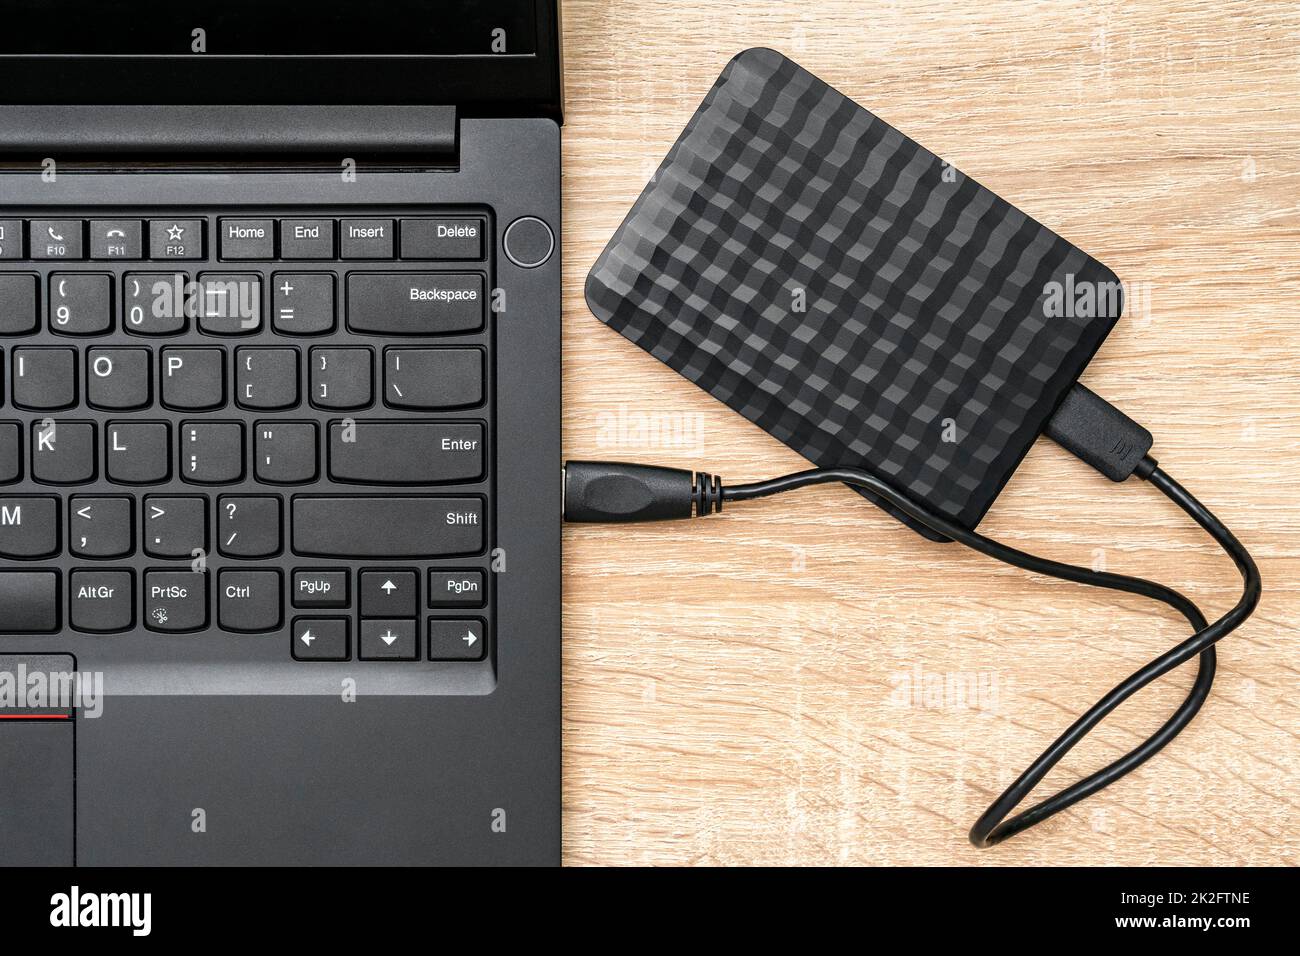 A portable hdd connected to a laptop Stock Photo